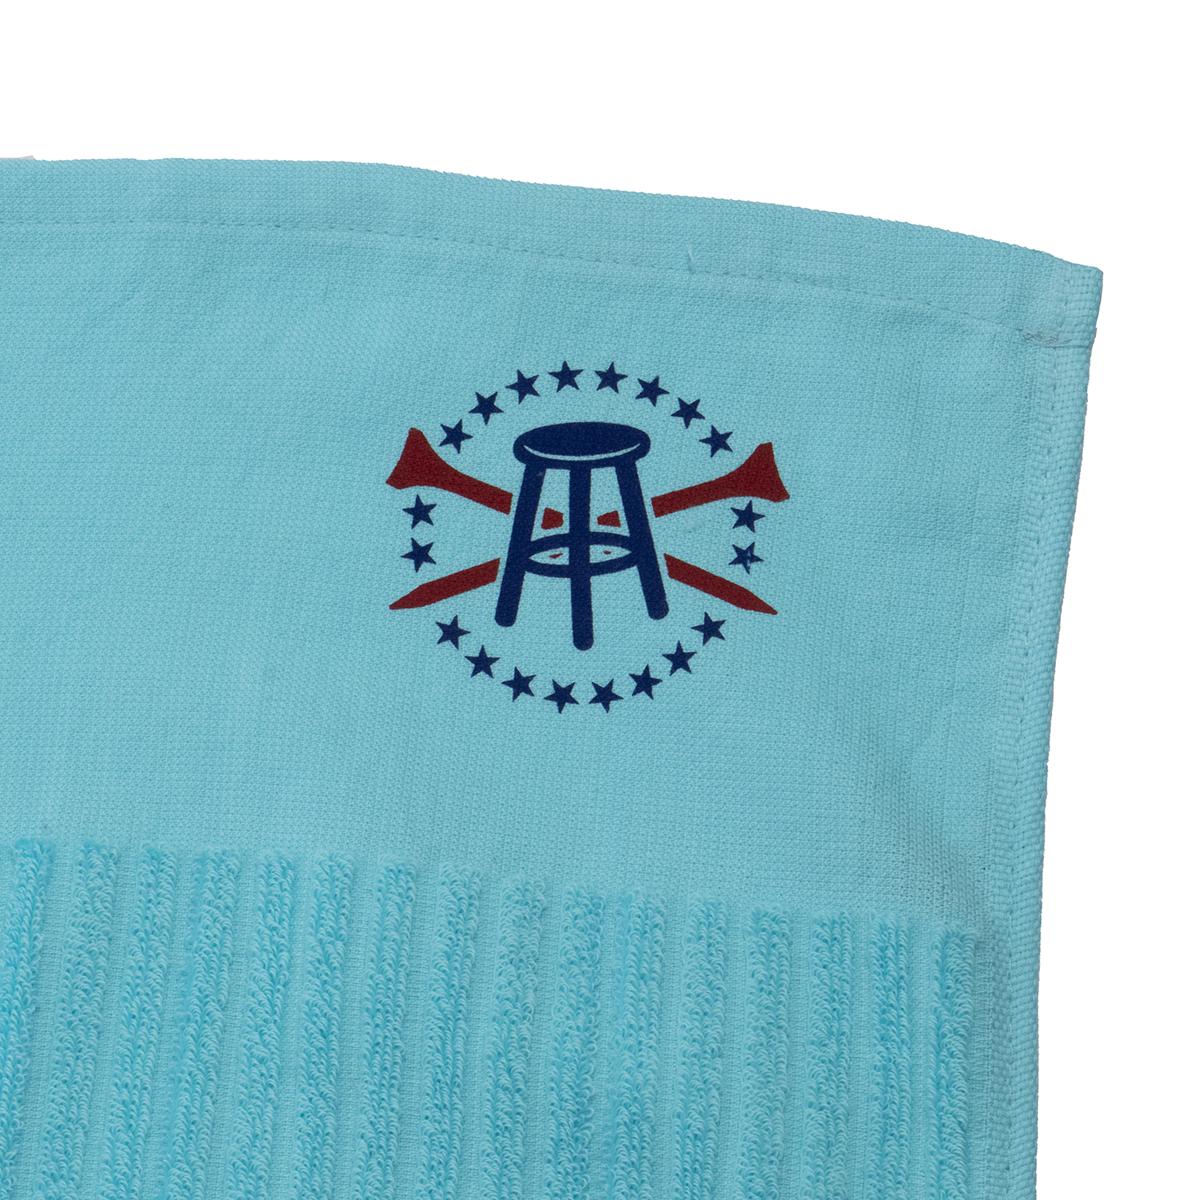 Barstool Golf Ain't No Hobby Striped Caddy Towel-Golf Accessories-Fore Play-Teal-One Size-Barstool Sports